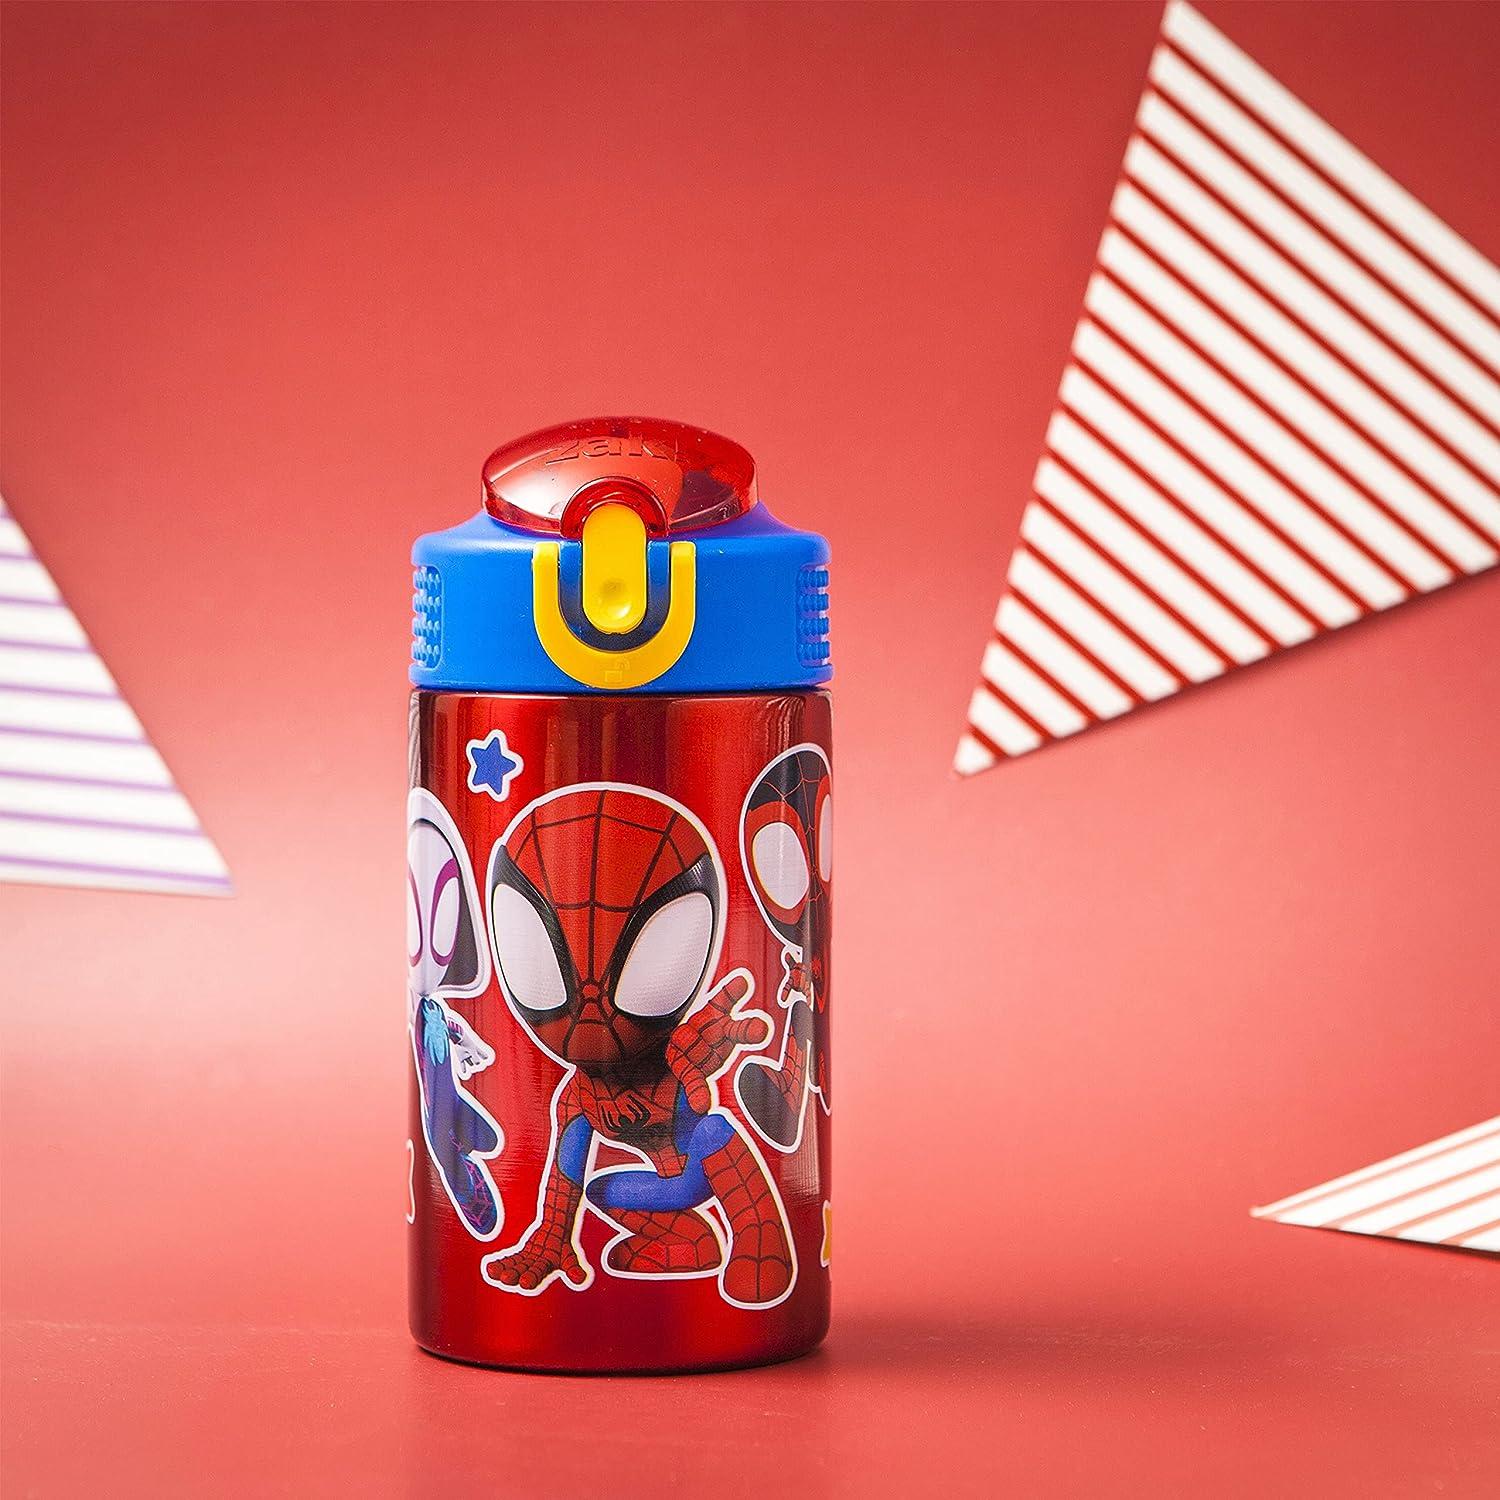 Zak Designs Marvel Spider-Man 188 Single Wall Stainless Steel Kids Water Bottle, Flip Straw Locking Spout Cover, Durable Cup for Sports or Travel 15